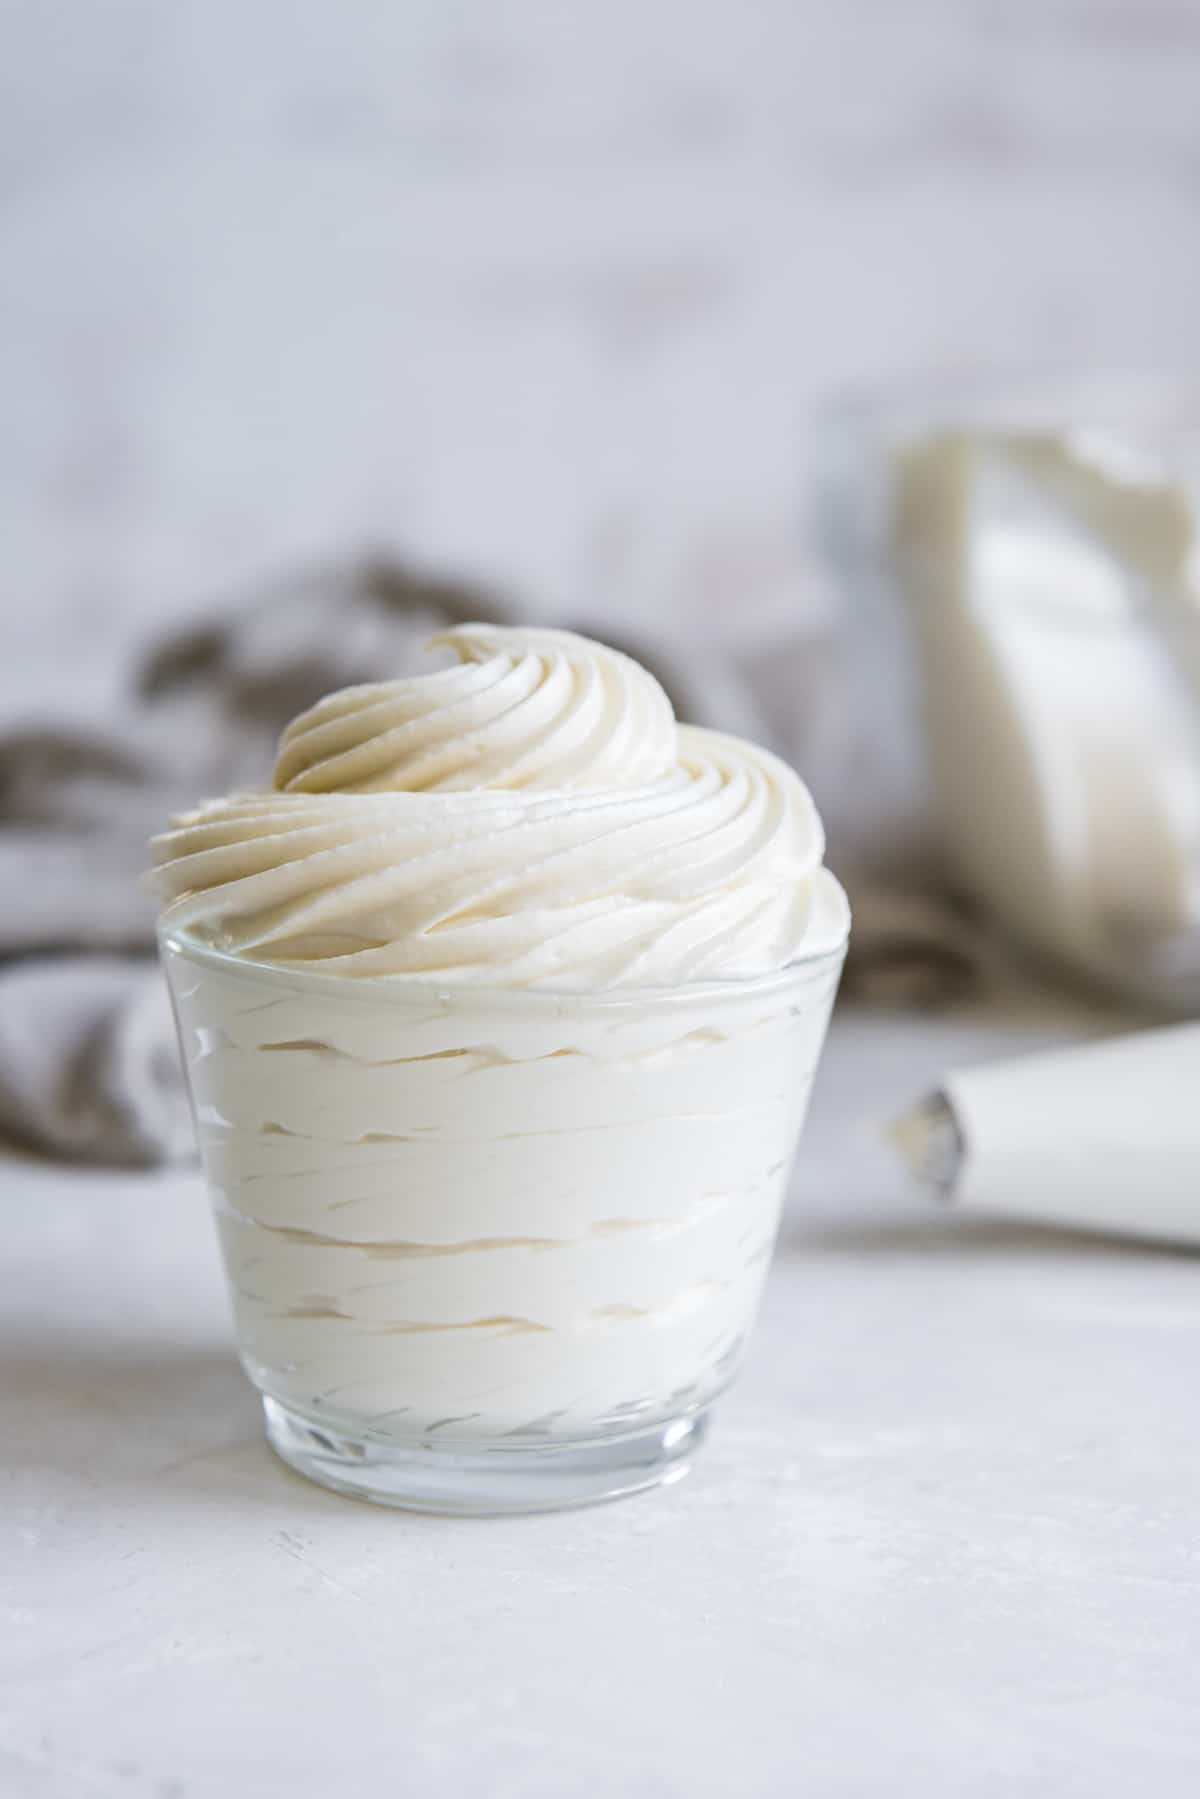 whipped cream cheese frosting piped into a small glass container in front of a piping bag